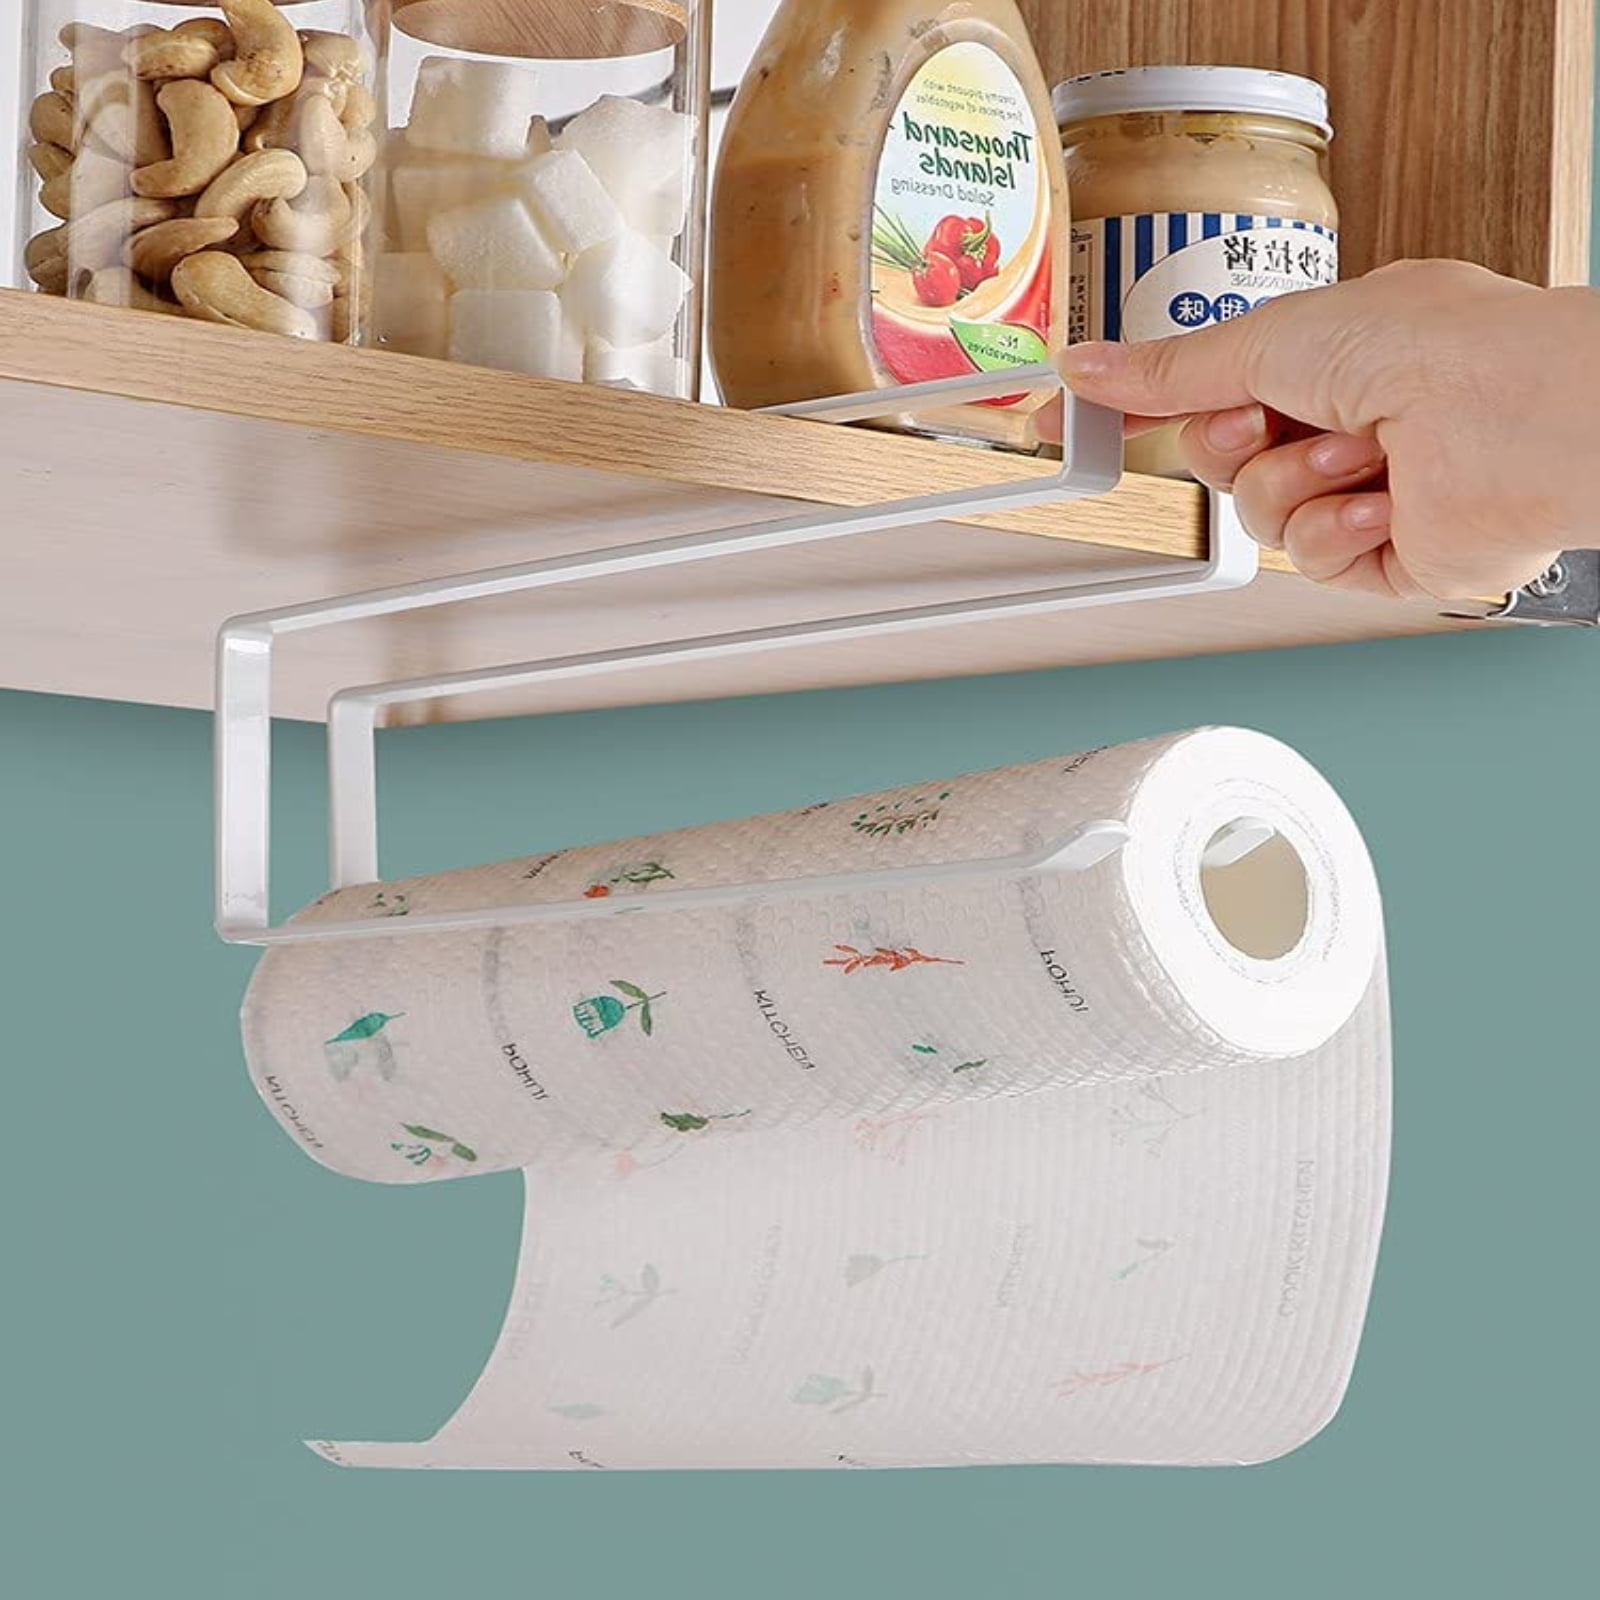 Paper Towel Holder 12 Inch JSK Self Adhesive Paper Towel Rack Under Cabinet Mount for Kitchen Large Roll Paper Stainless Steel